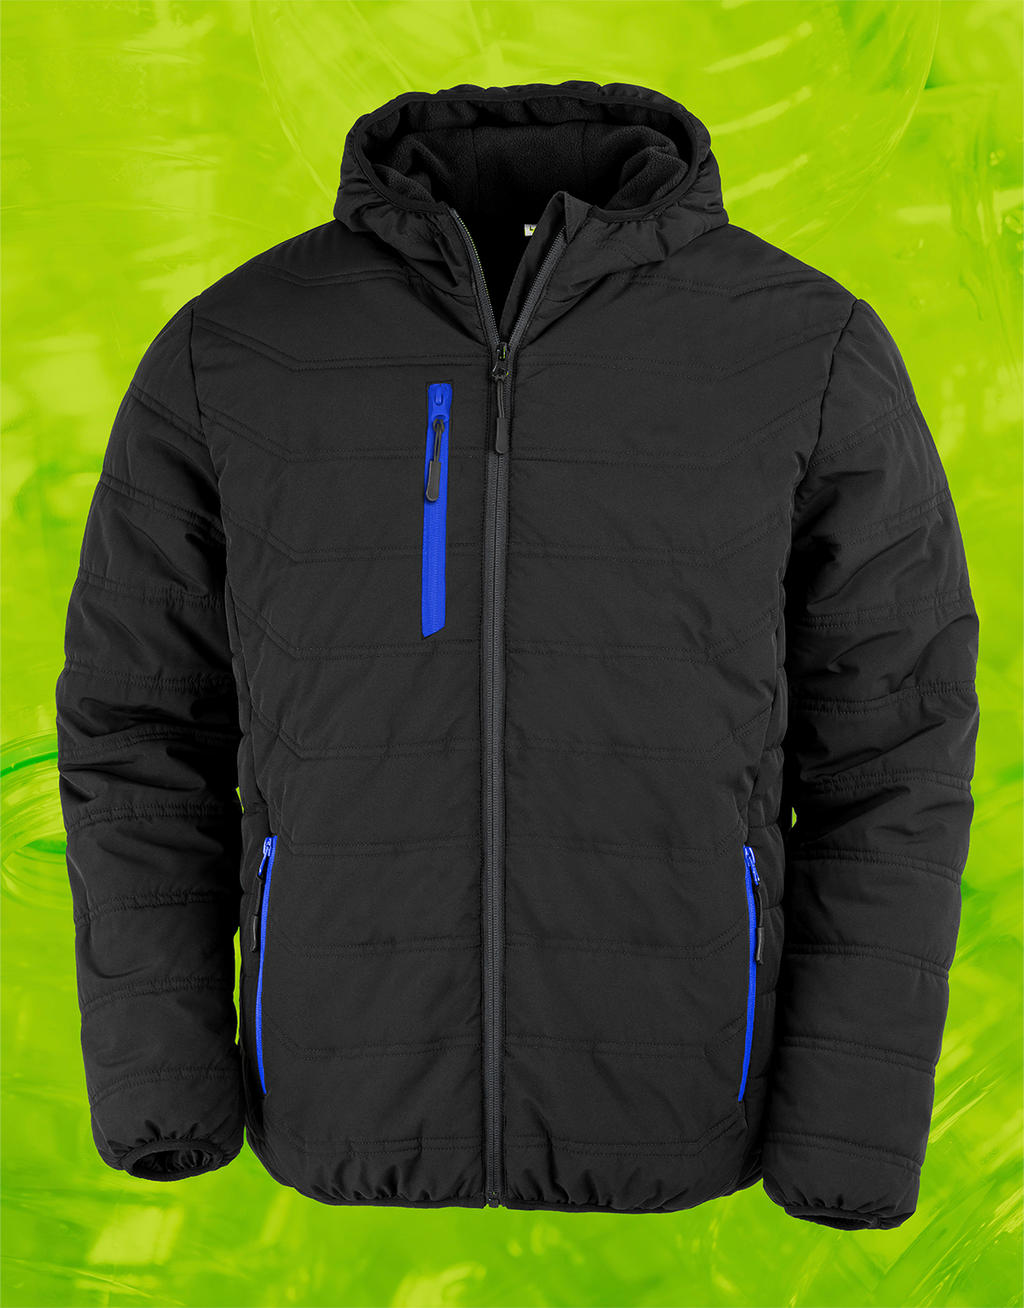  Black Compass Padded Winter Jacket in Farbe Black/Royal